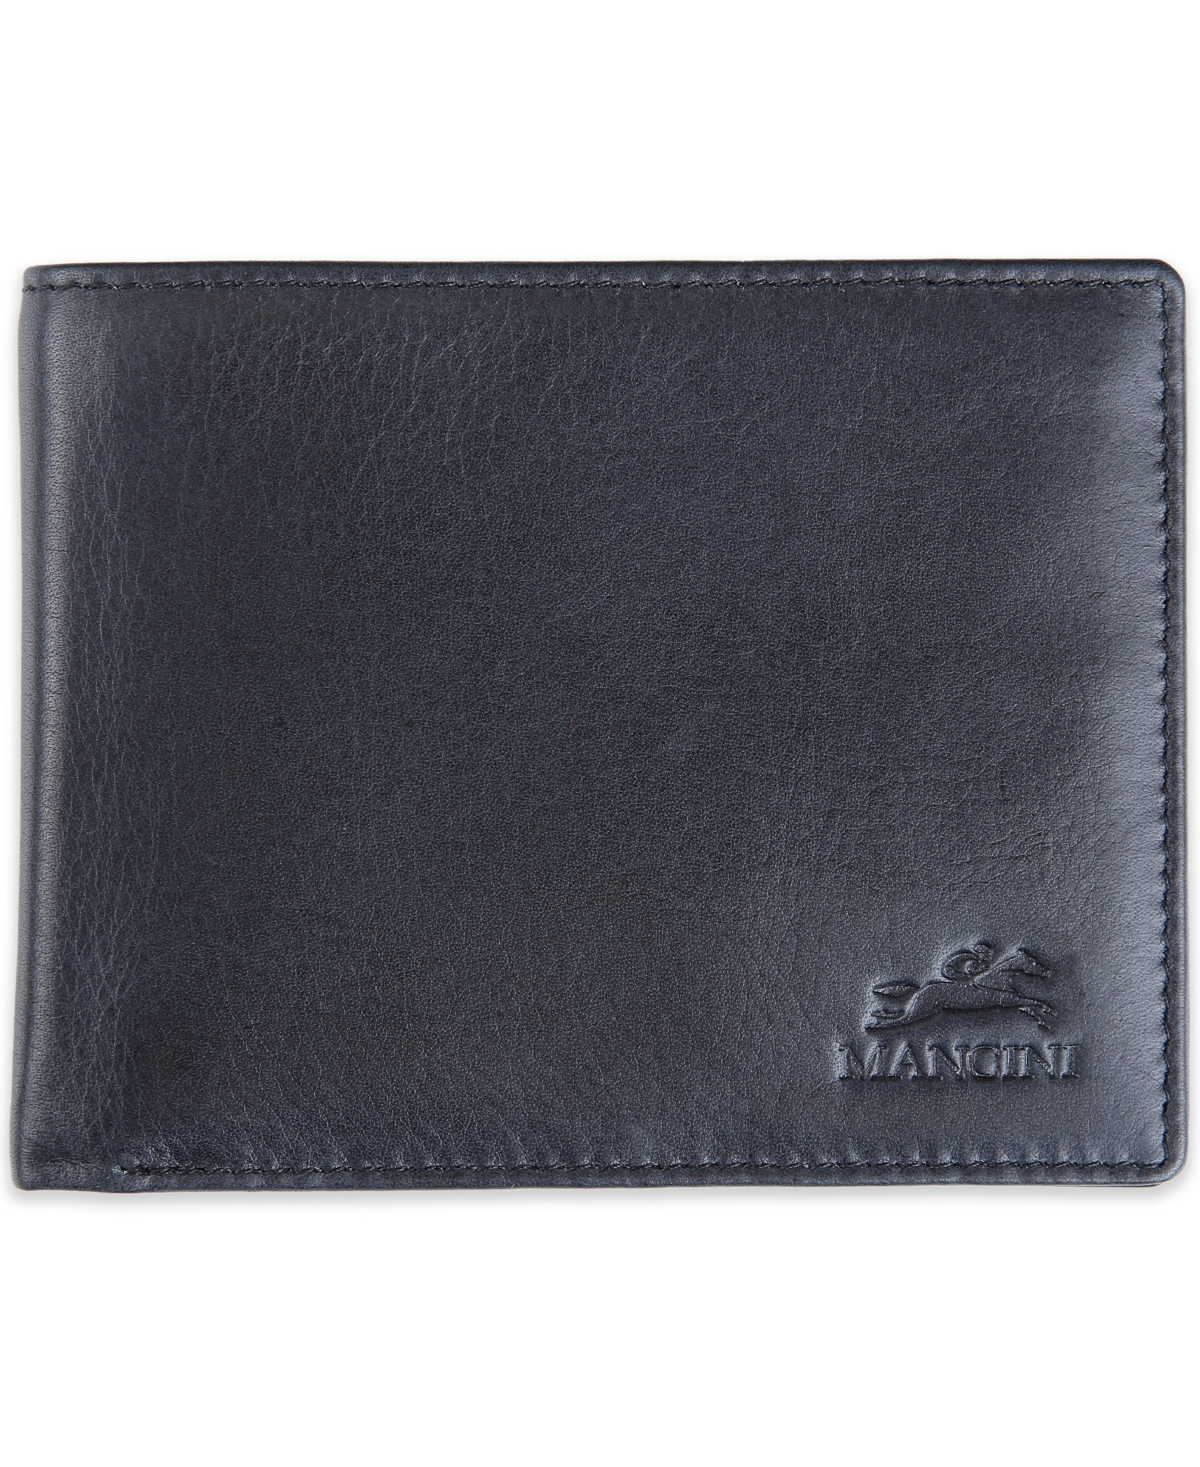 Mancini Men's Bellagio Collection Center Wing Bifold Wallet with Coin Pocket